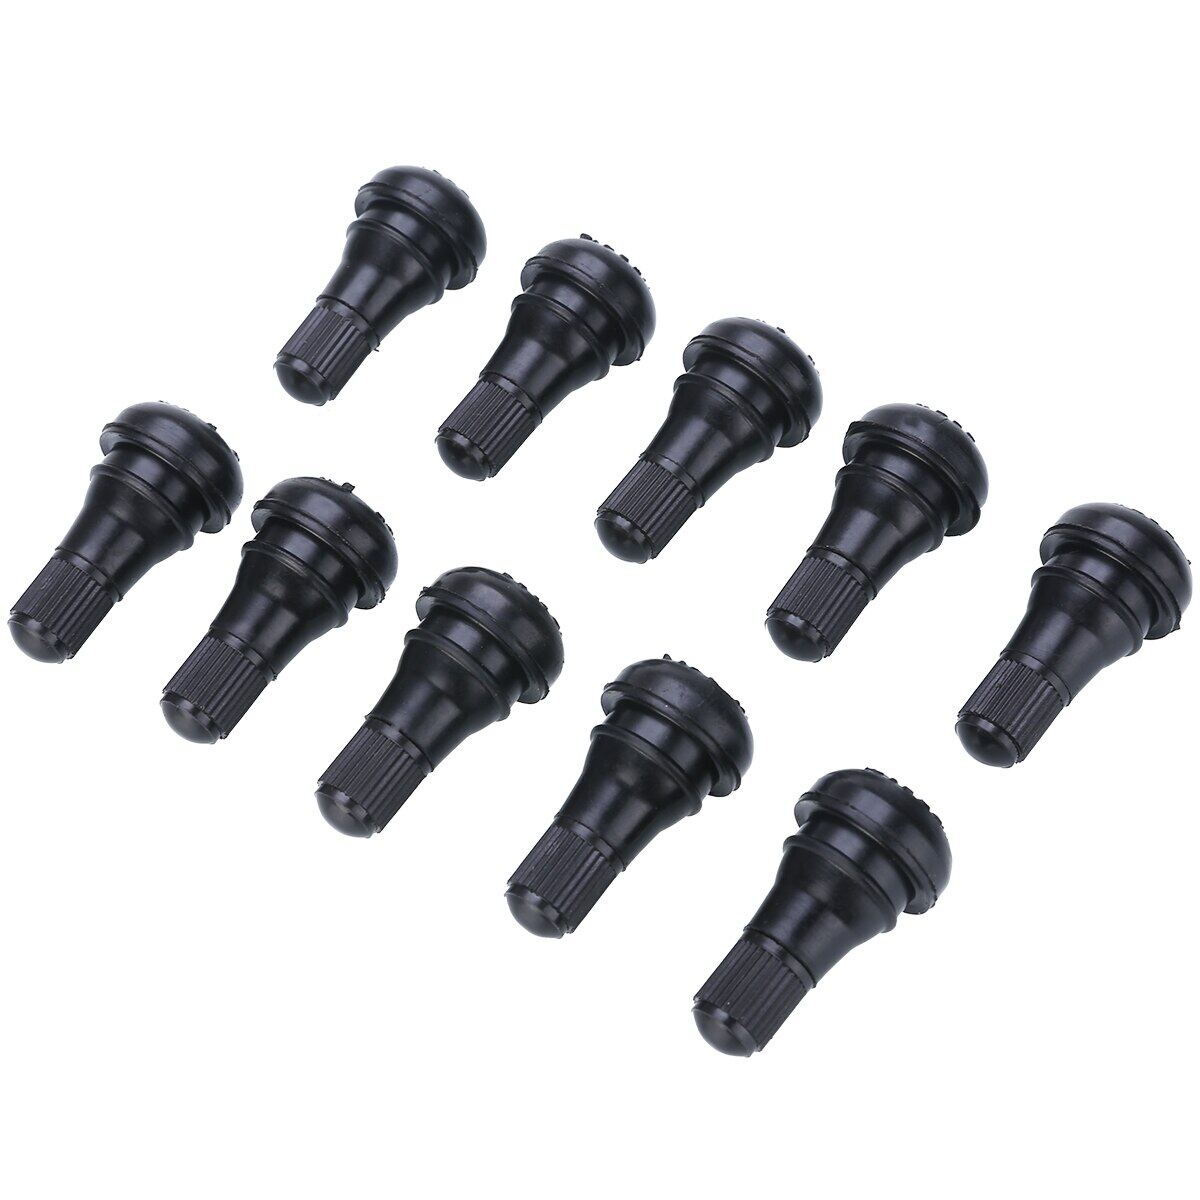 10pcs TR412 Short Tubeless Snap-in Vavle Black Rubber Tyre Valve Stems Moped Motorcycle Car Quad for Wheels Tires Parts